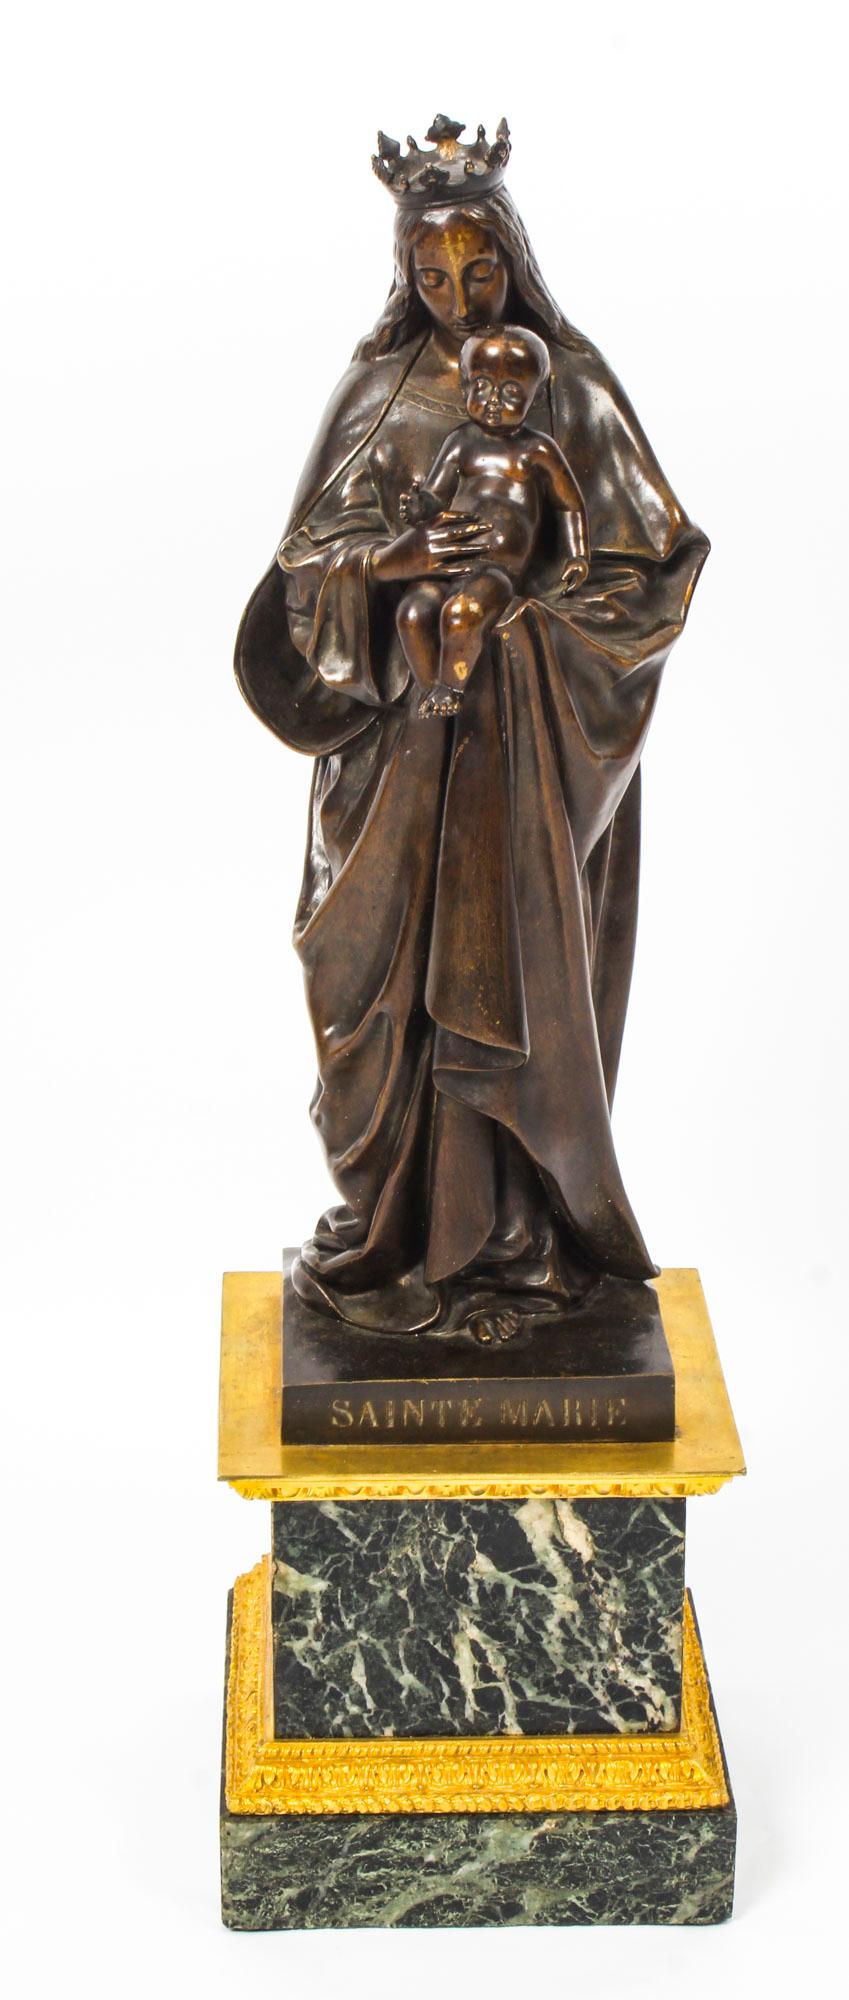 This is a large finely cast brown patinated bronze ormolu and marble sculpture of Sainte Marie by De Beaumont. It is signed on the base and also inscribed 